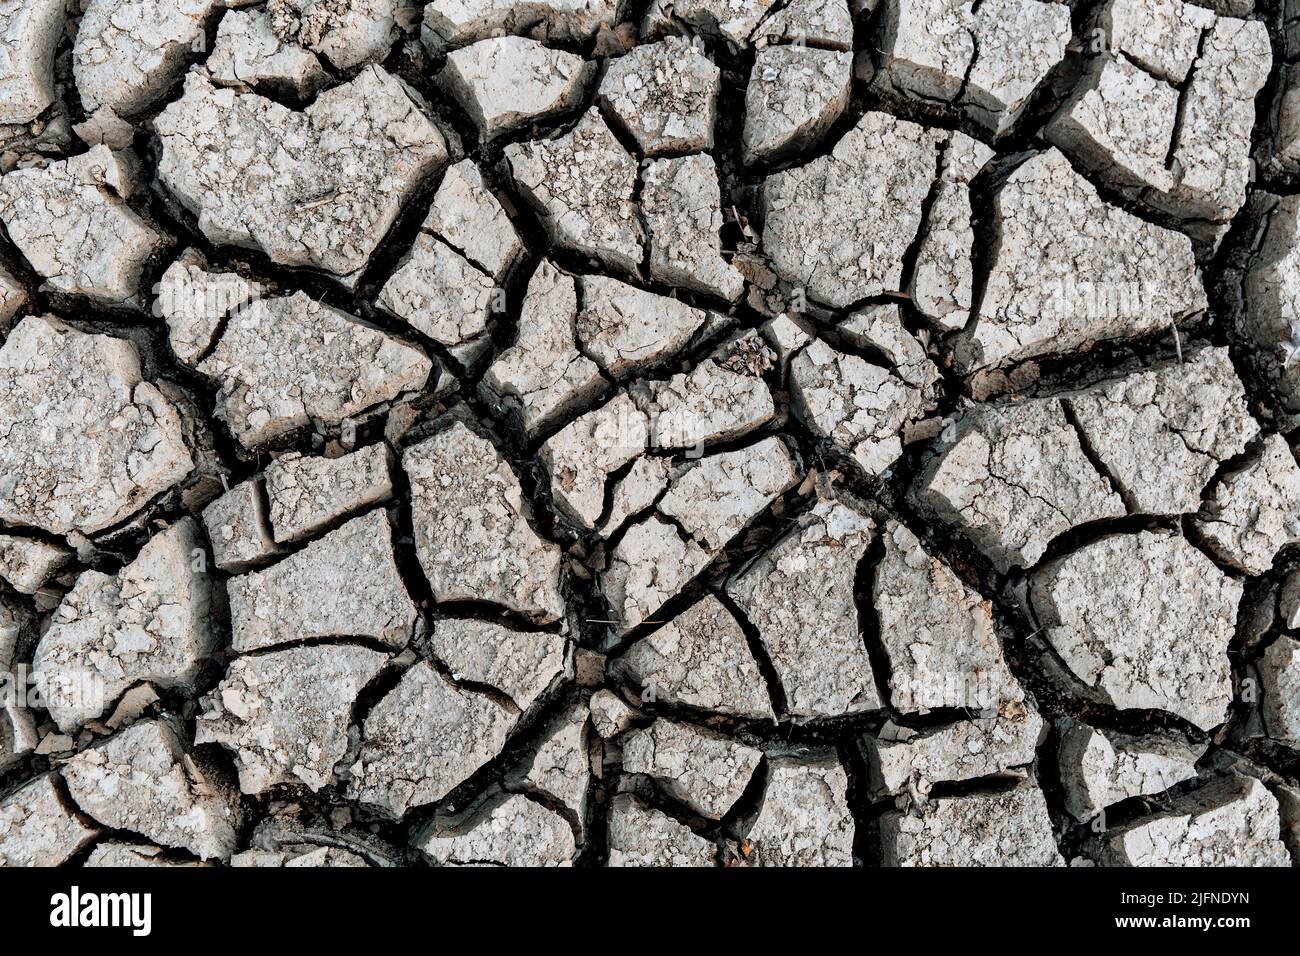 Cracked earth, cracked soil. texture of grungy dry cracking parched earth. Global warming effect.  Stock Photo